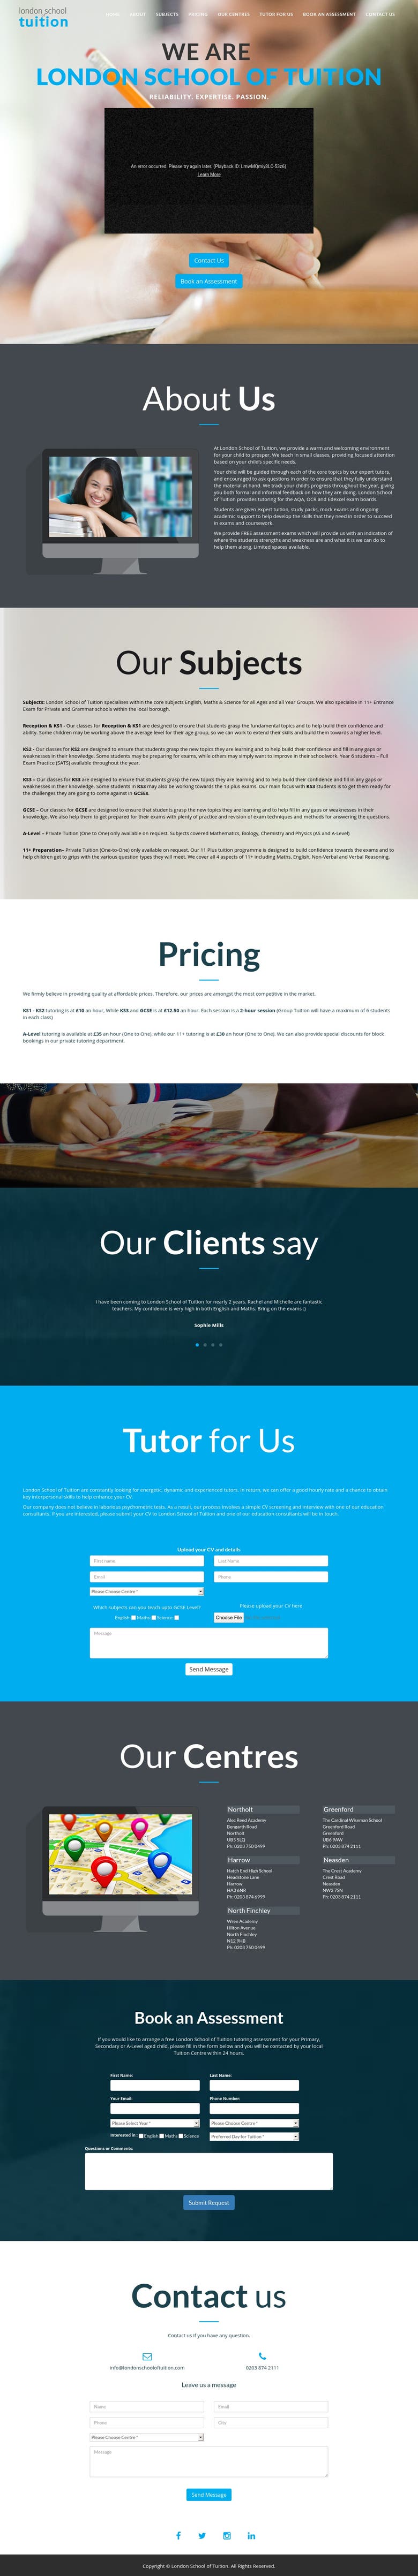 Tuition service